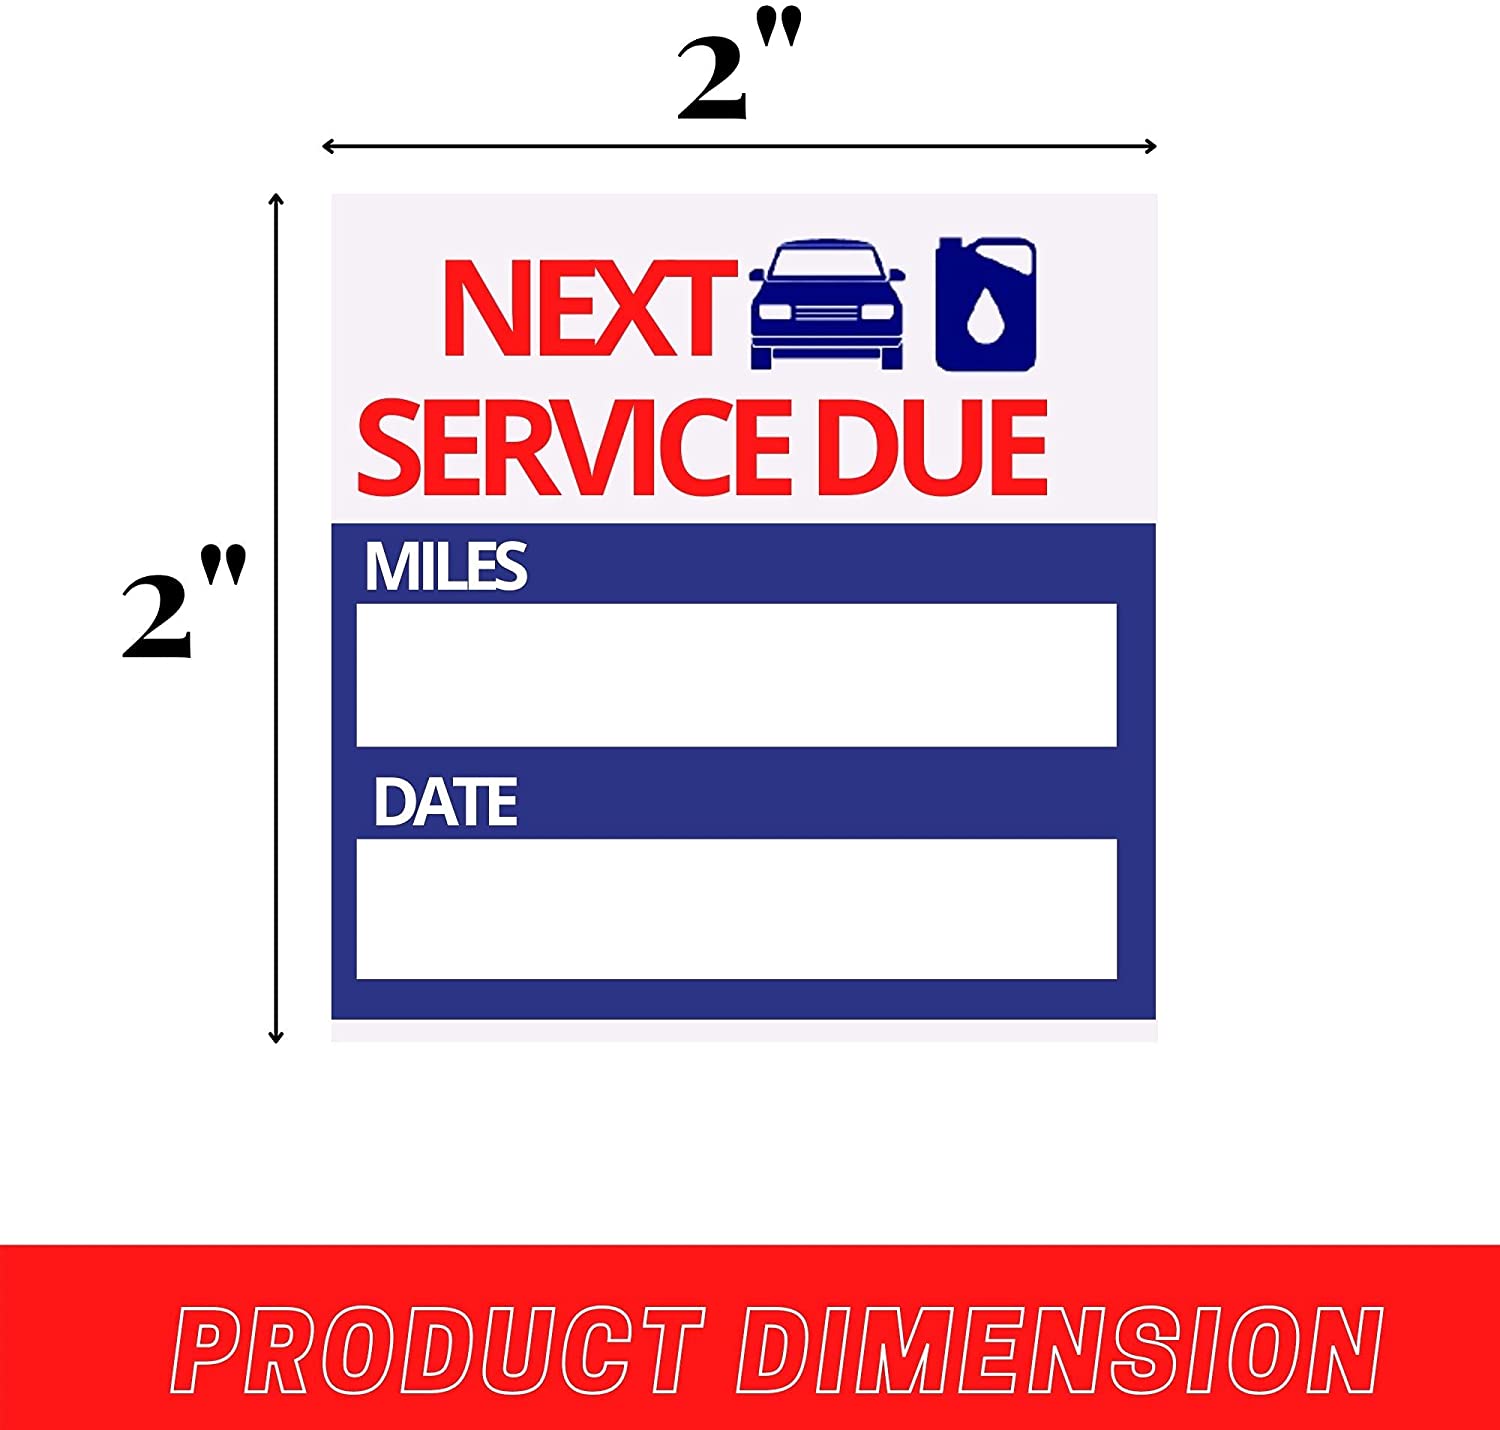 2x2 Inch Oil Change Auto Service Reminder Sticker Roll, Next Service Due Labels for Cars Windows Windshield (1 Roll)